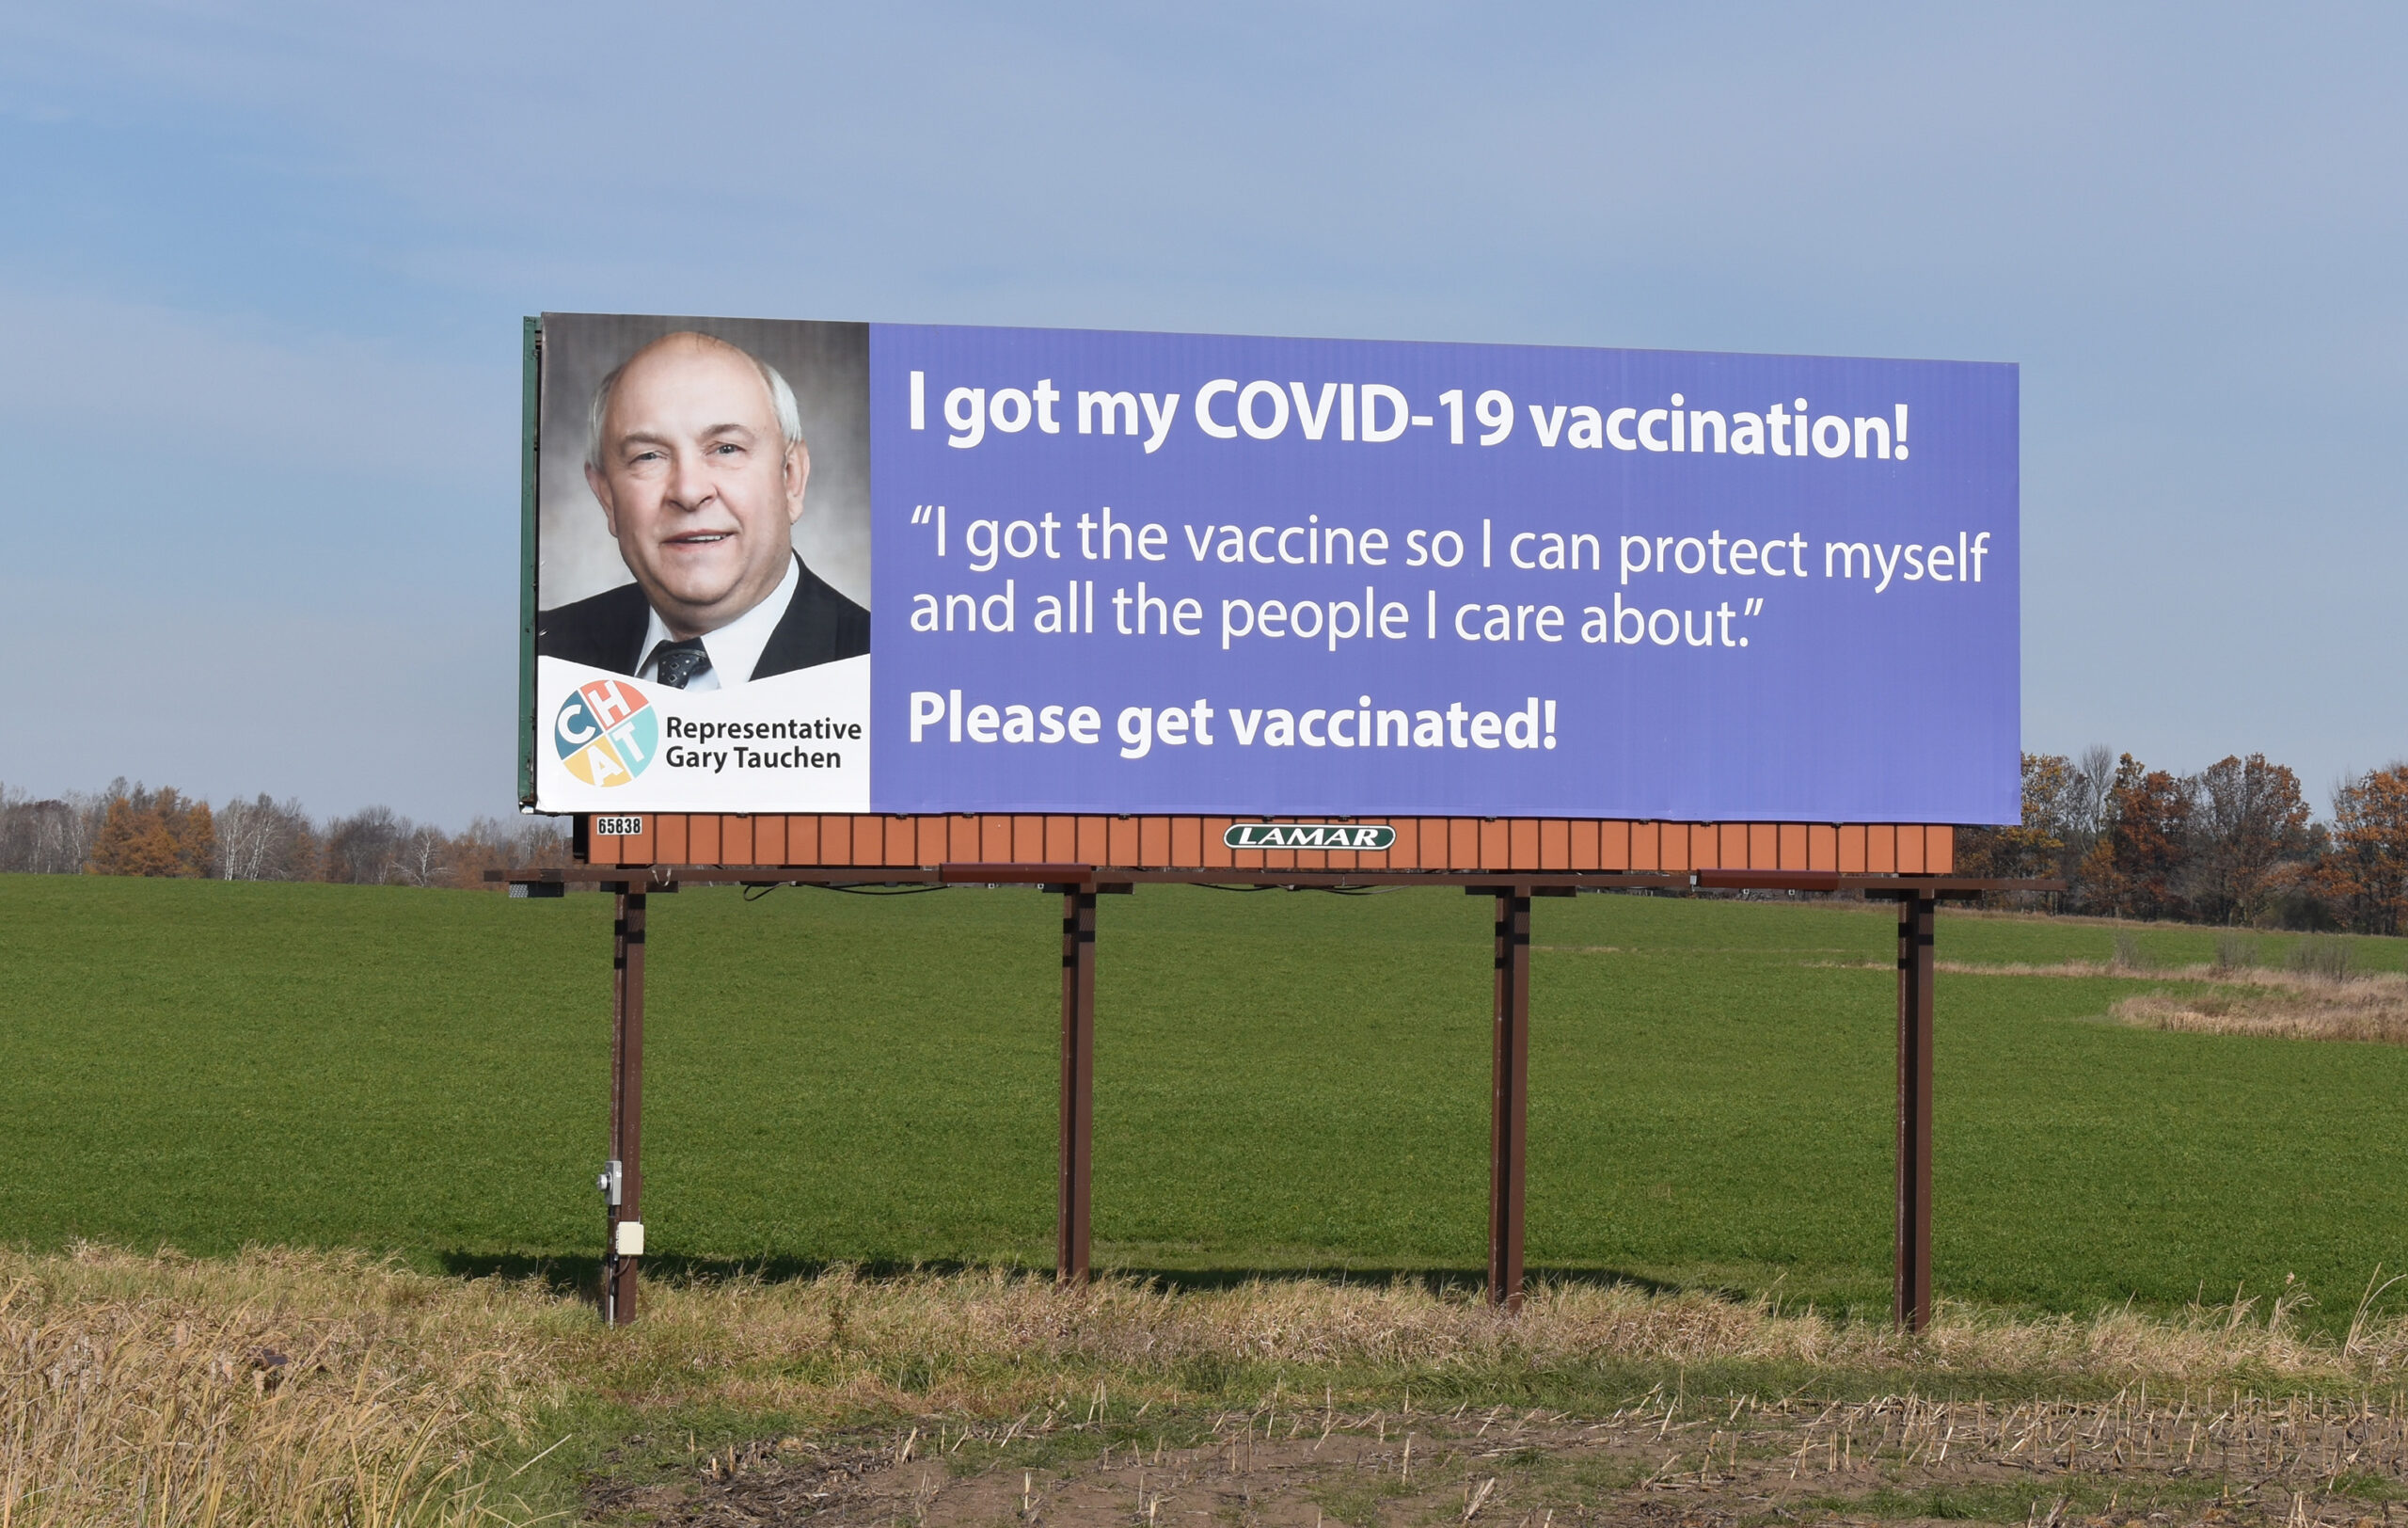 Rep. Gary Tauchen appears on a billboard encouraging COVID-19 vaccination in Shawano County